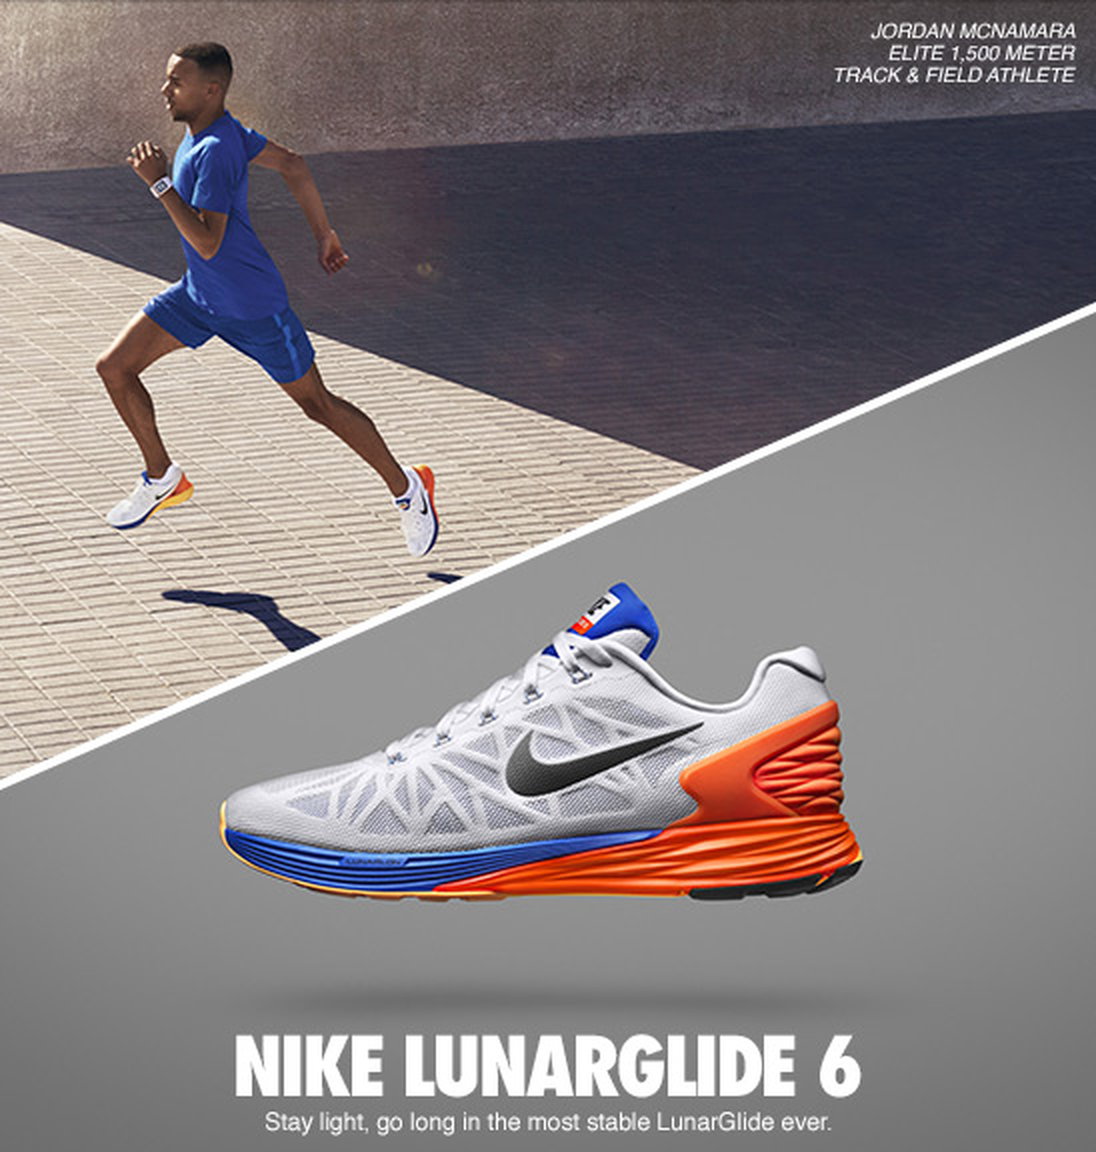 Nike plus +: Just In: the New Nike LunarGlide 6 | Milled